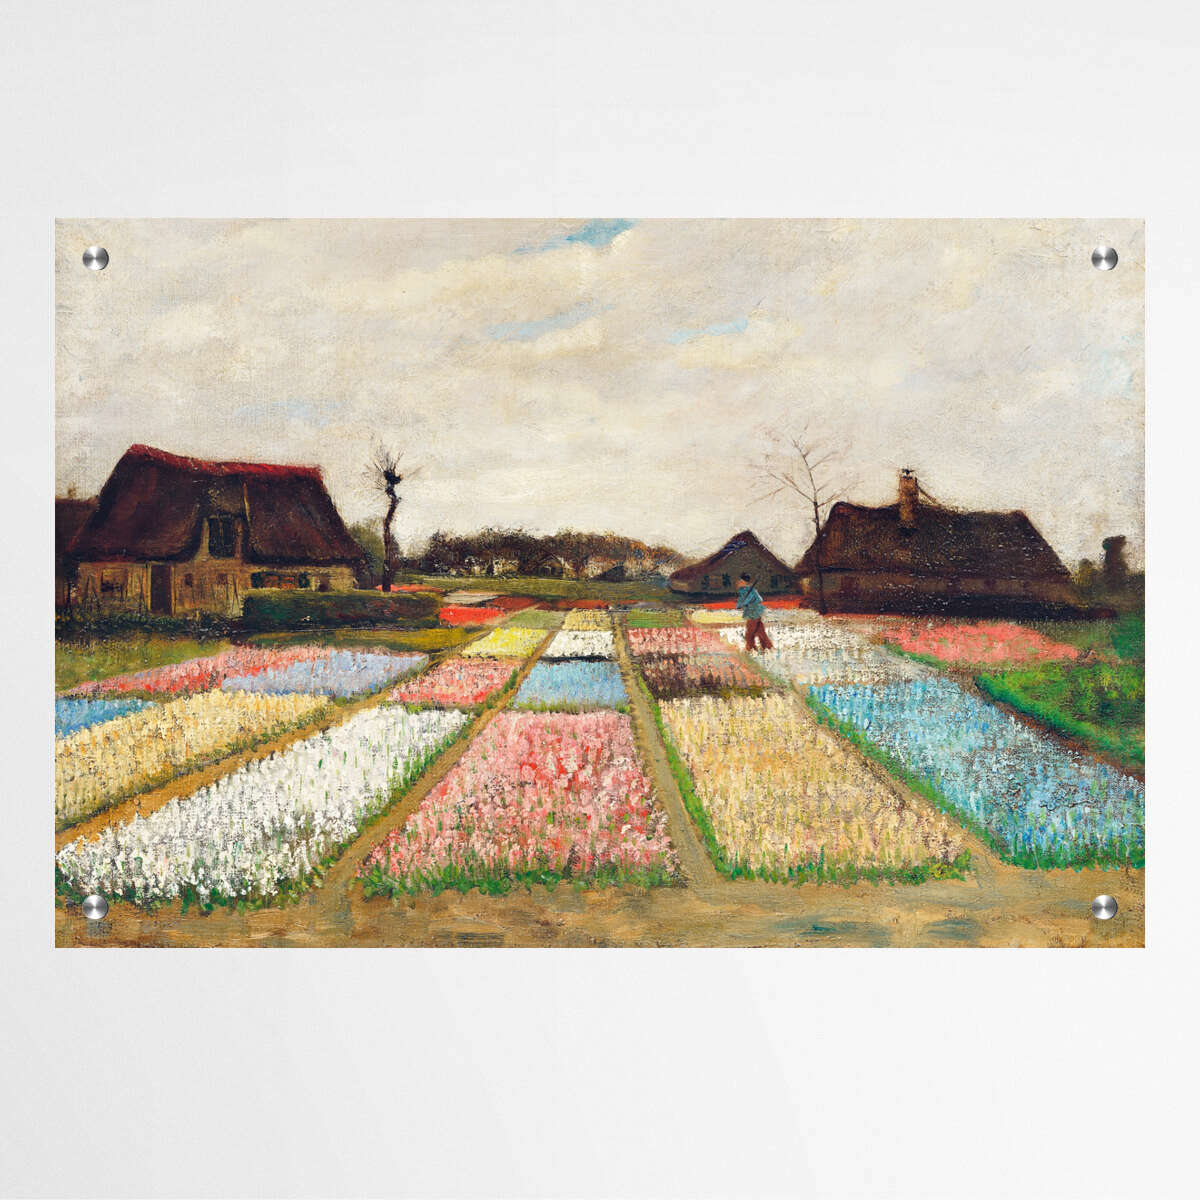 Flower Beds in Holland by Vincent Van Gogh | Vincent Van Gogh Wall Art Prints - The Canvas Hive